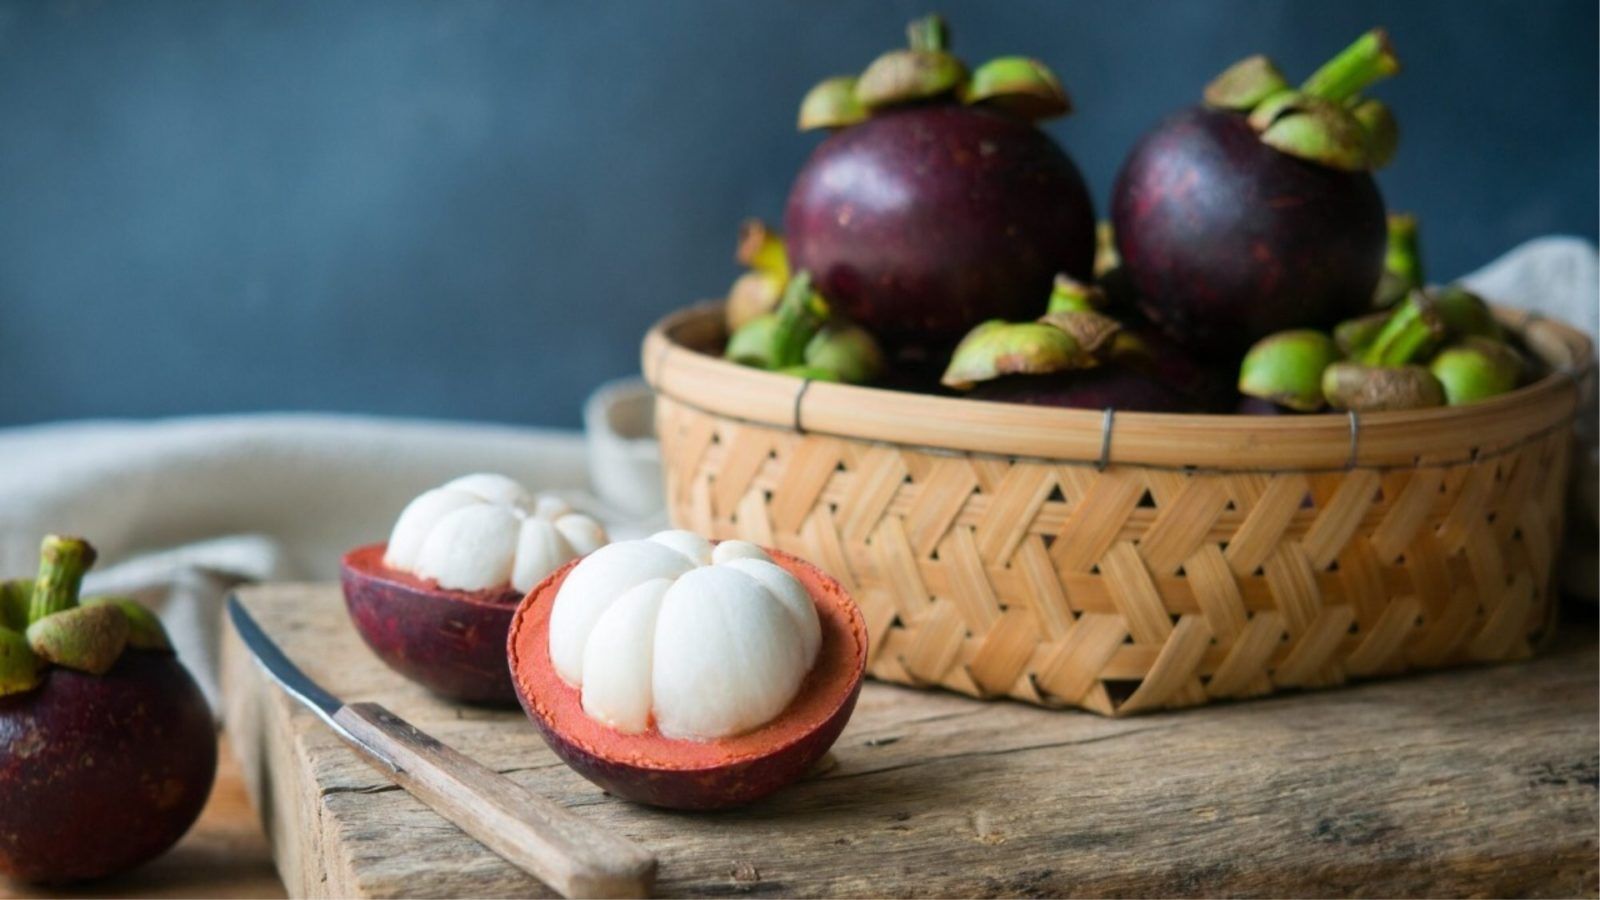 What is a mangosteen, what does it taste like, and why is it so expensive?